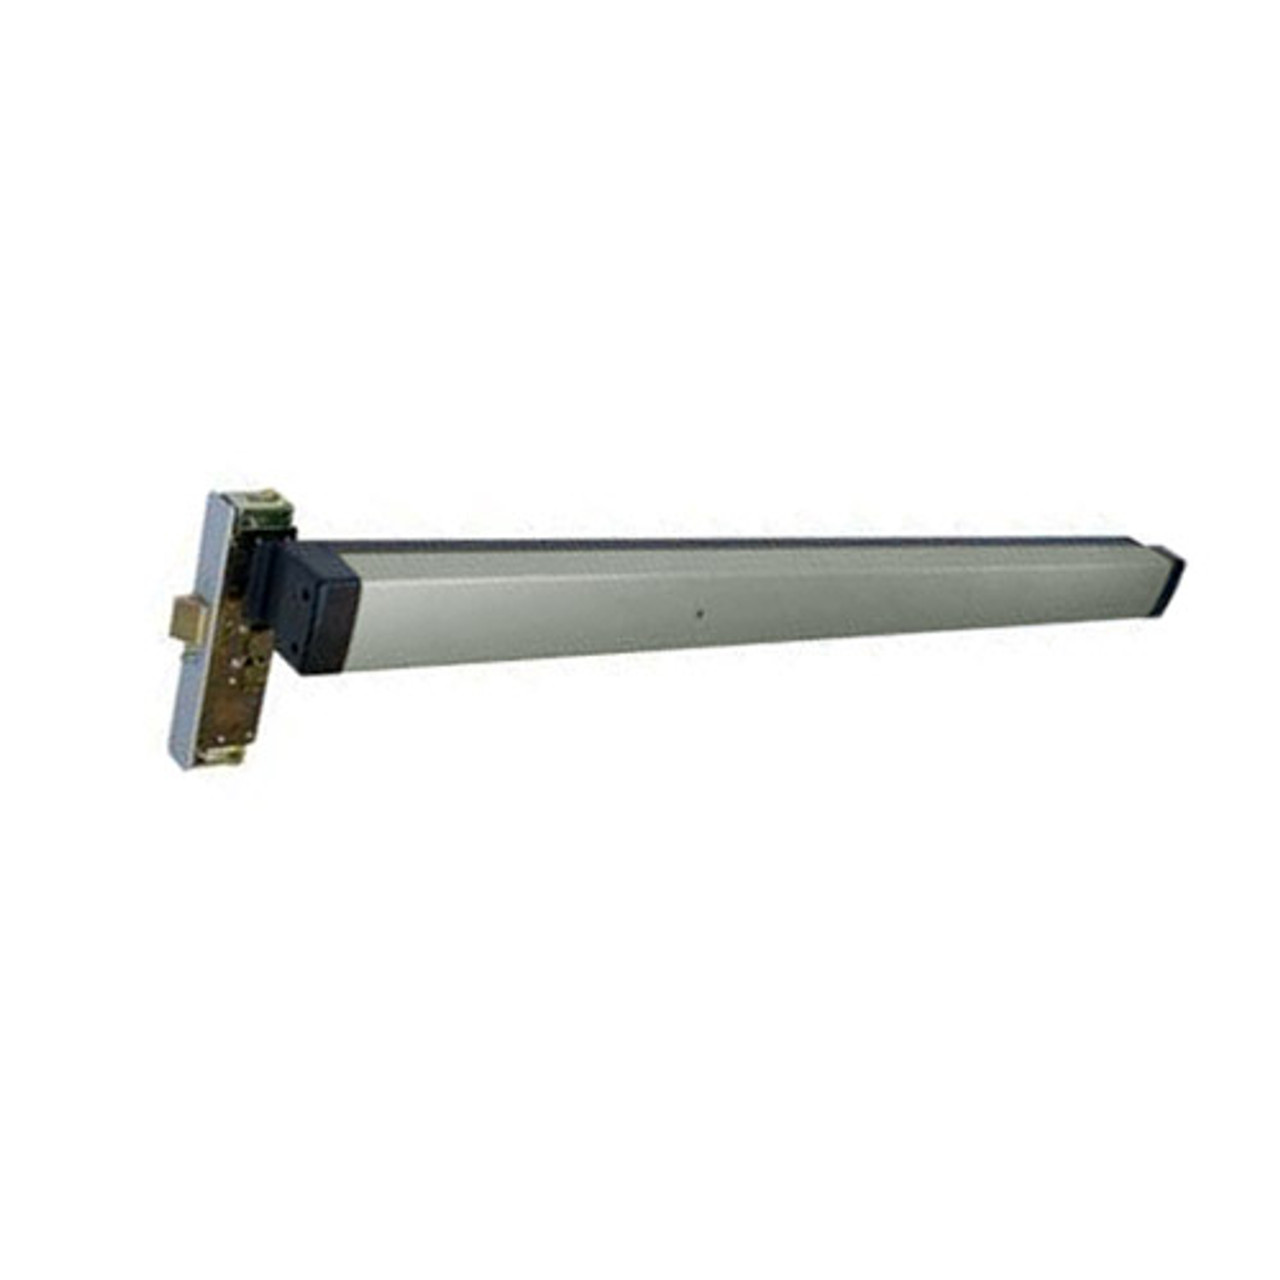 3300-M-80-36-US32 Adams Rite Mortise Exit Device